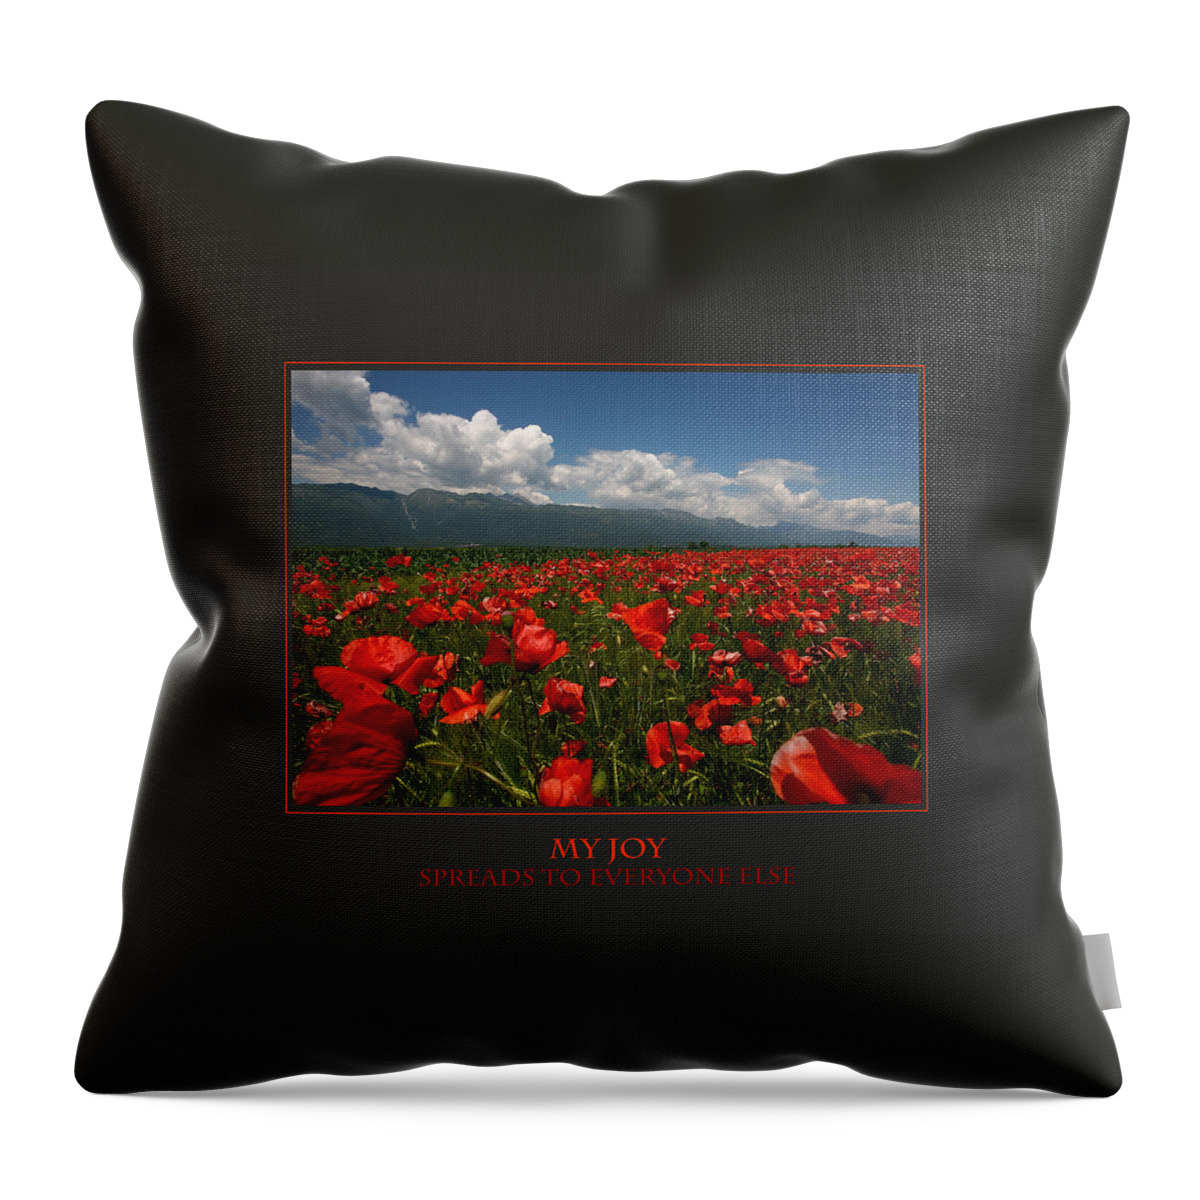 Motivational Art Throw Pillow featuring the photograph My Joy Spreads To Everyone Else by Donna Corless